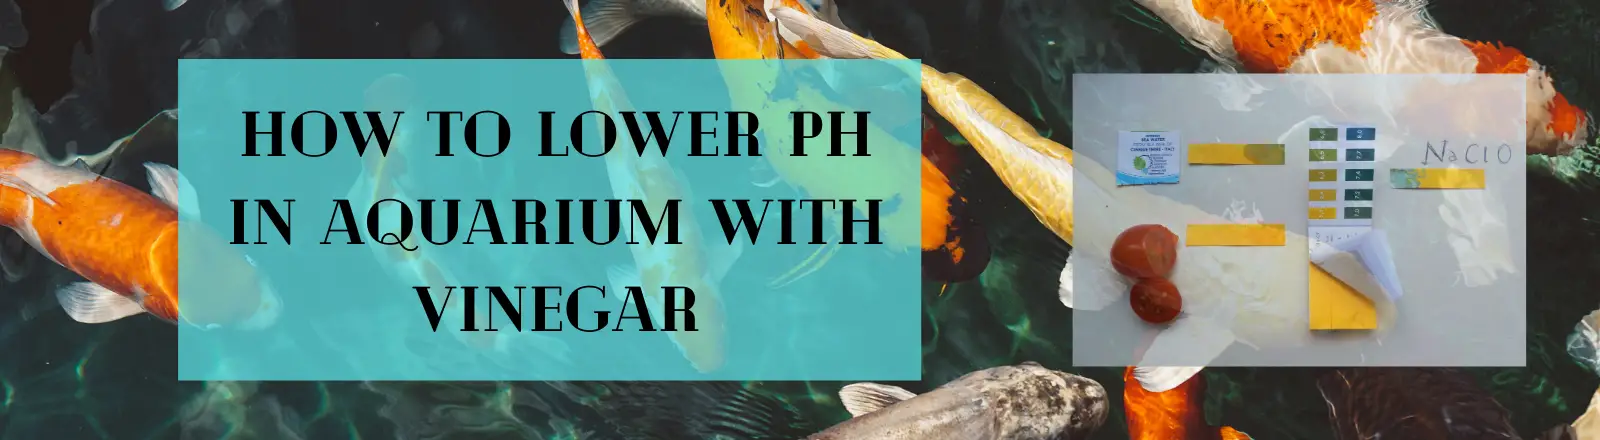 How to Lower pH in Aquarium with vinegar?<span class="wtr-time-wrap after-title"><span class="wtr-time-number">6</span> min read</span>